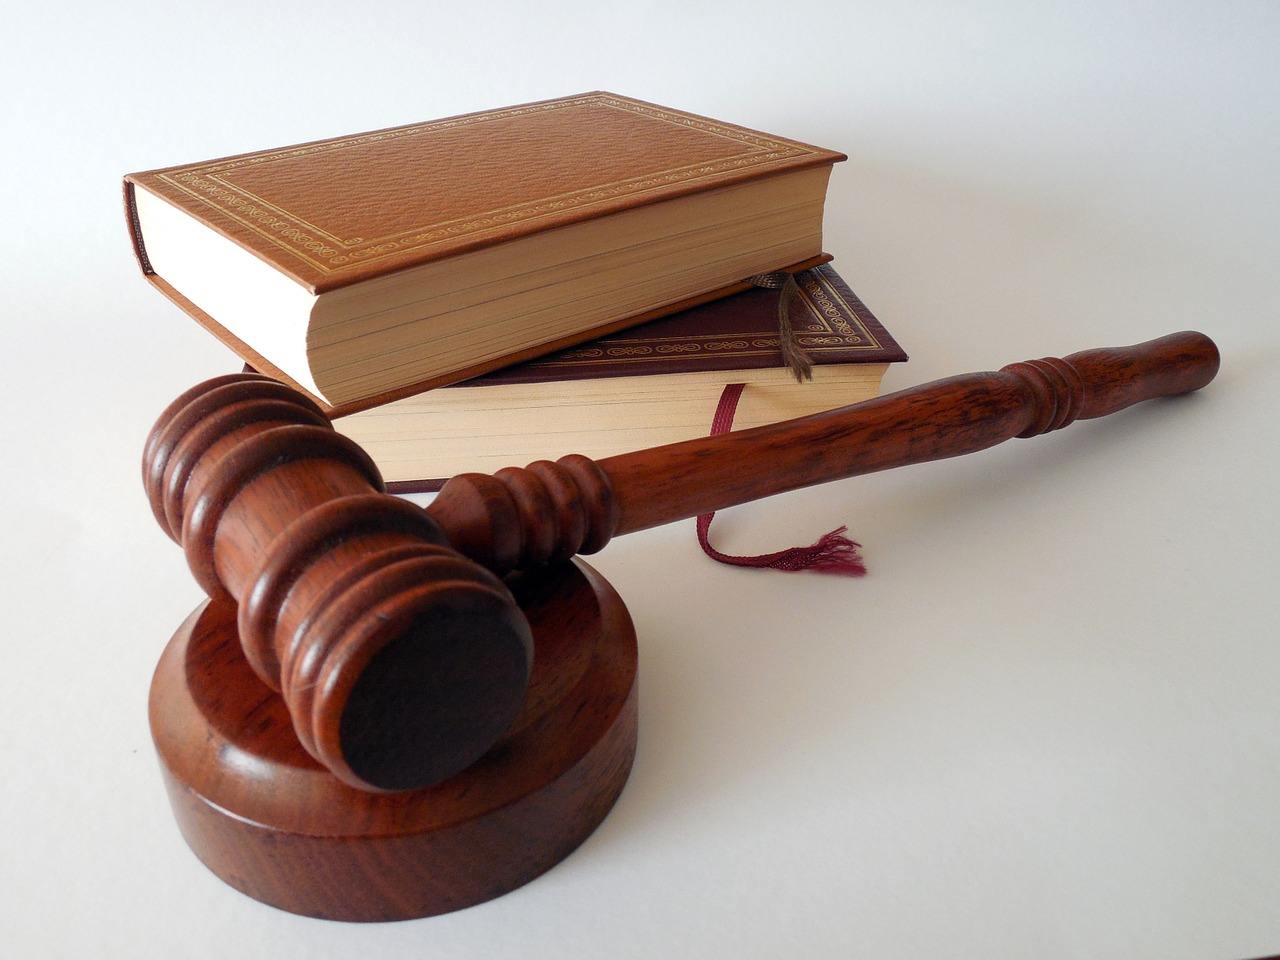 gavel; lawsuits and liability